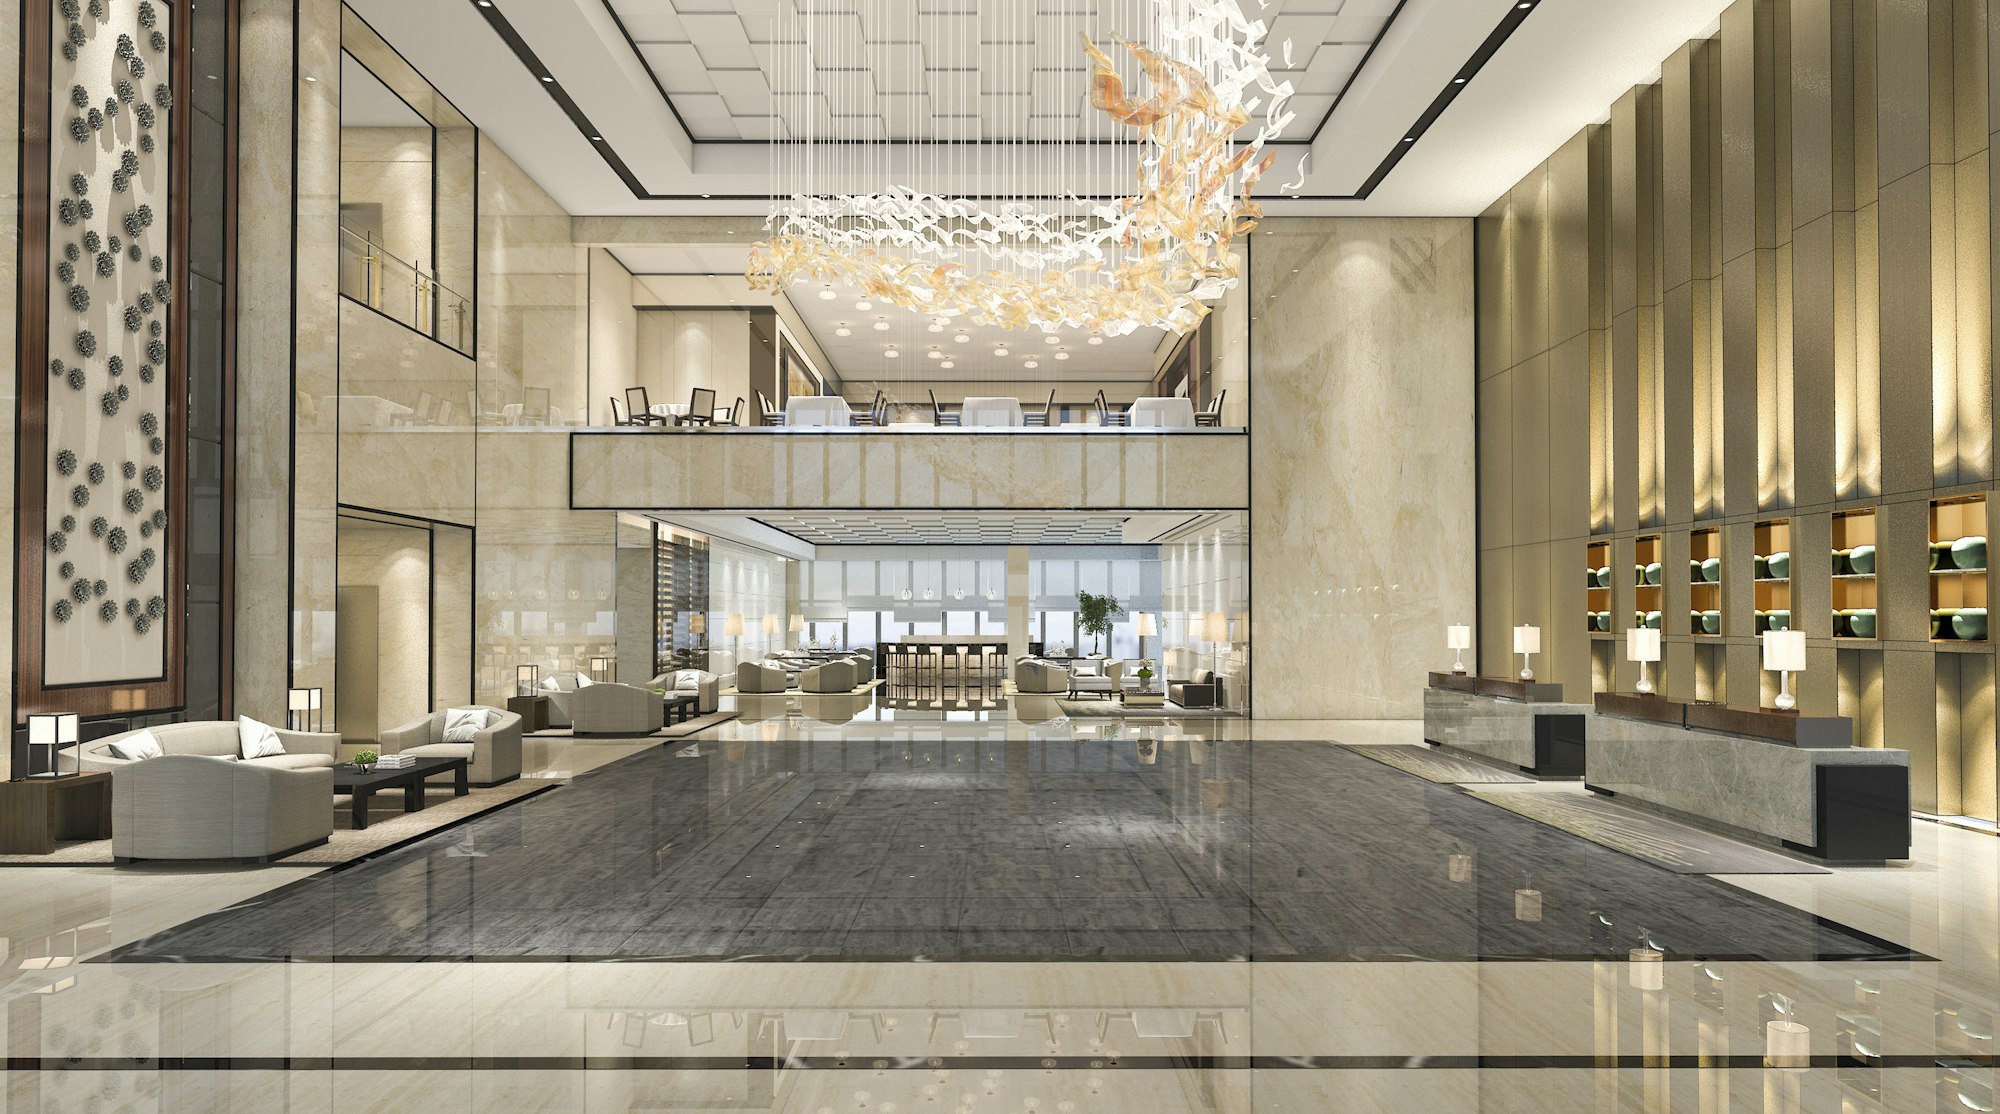 3d rendering luxury hotel reception hall and lounge restaurant